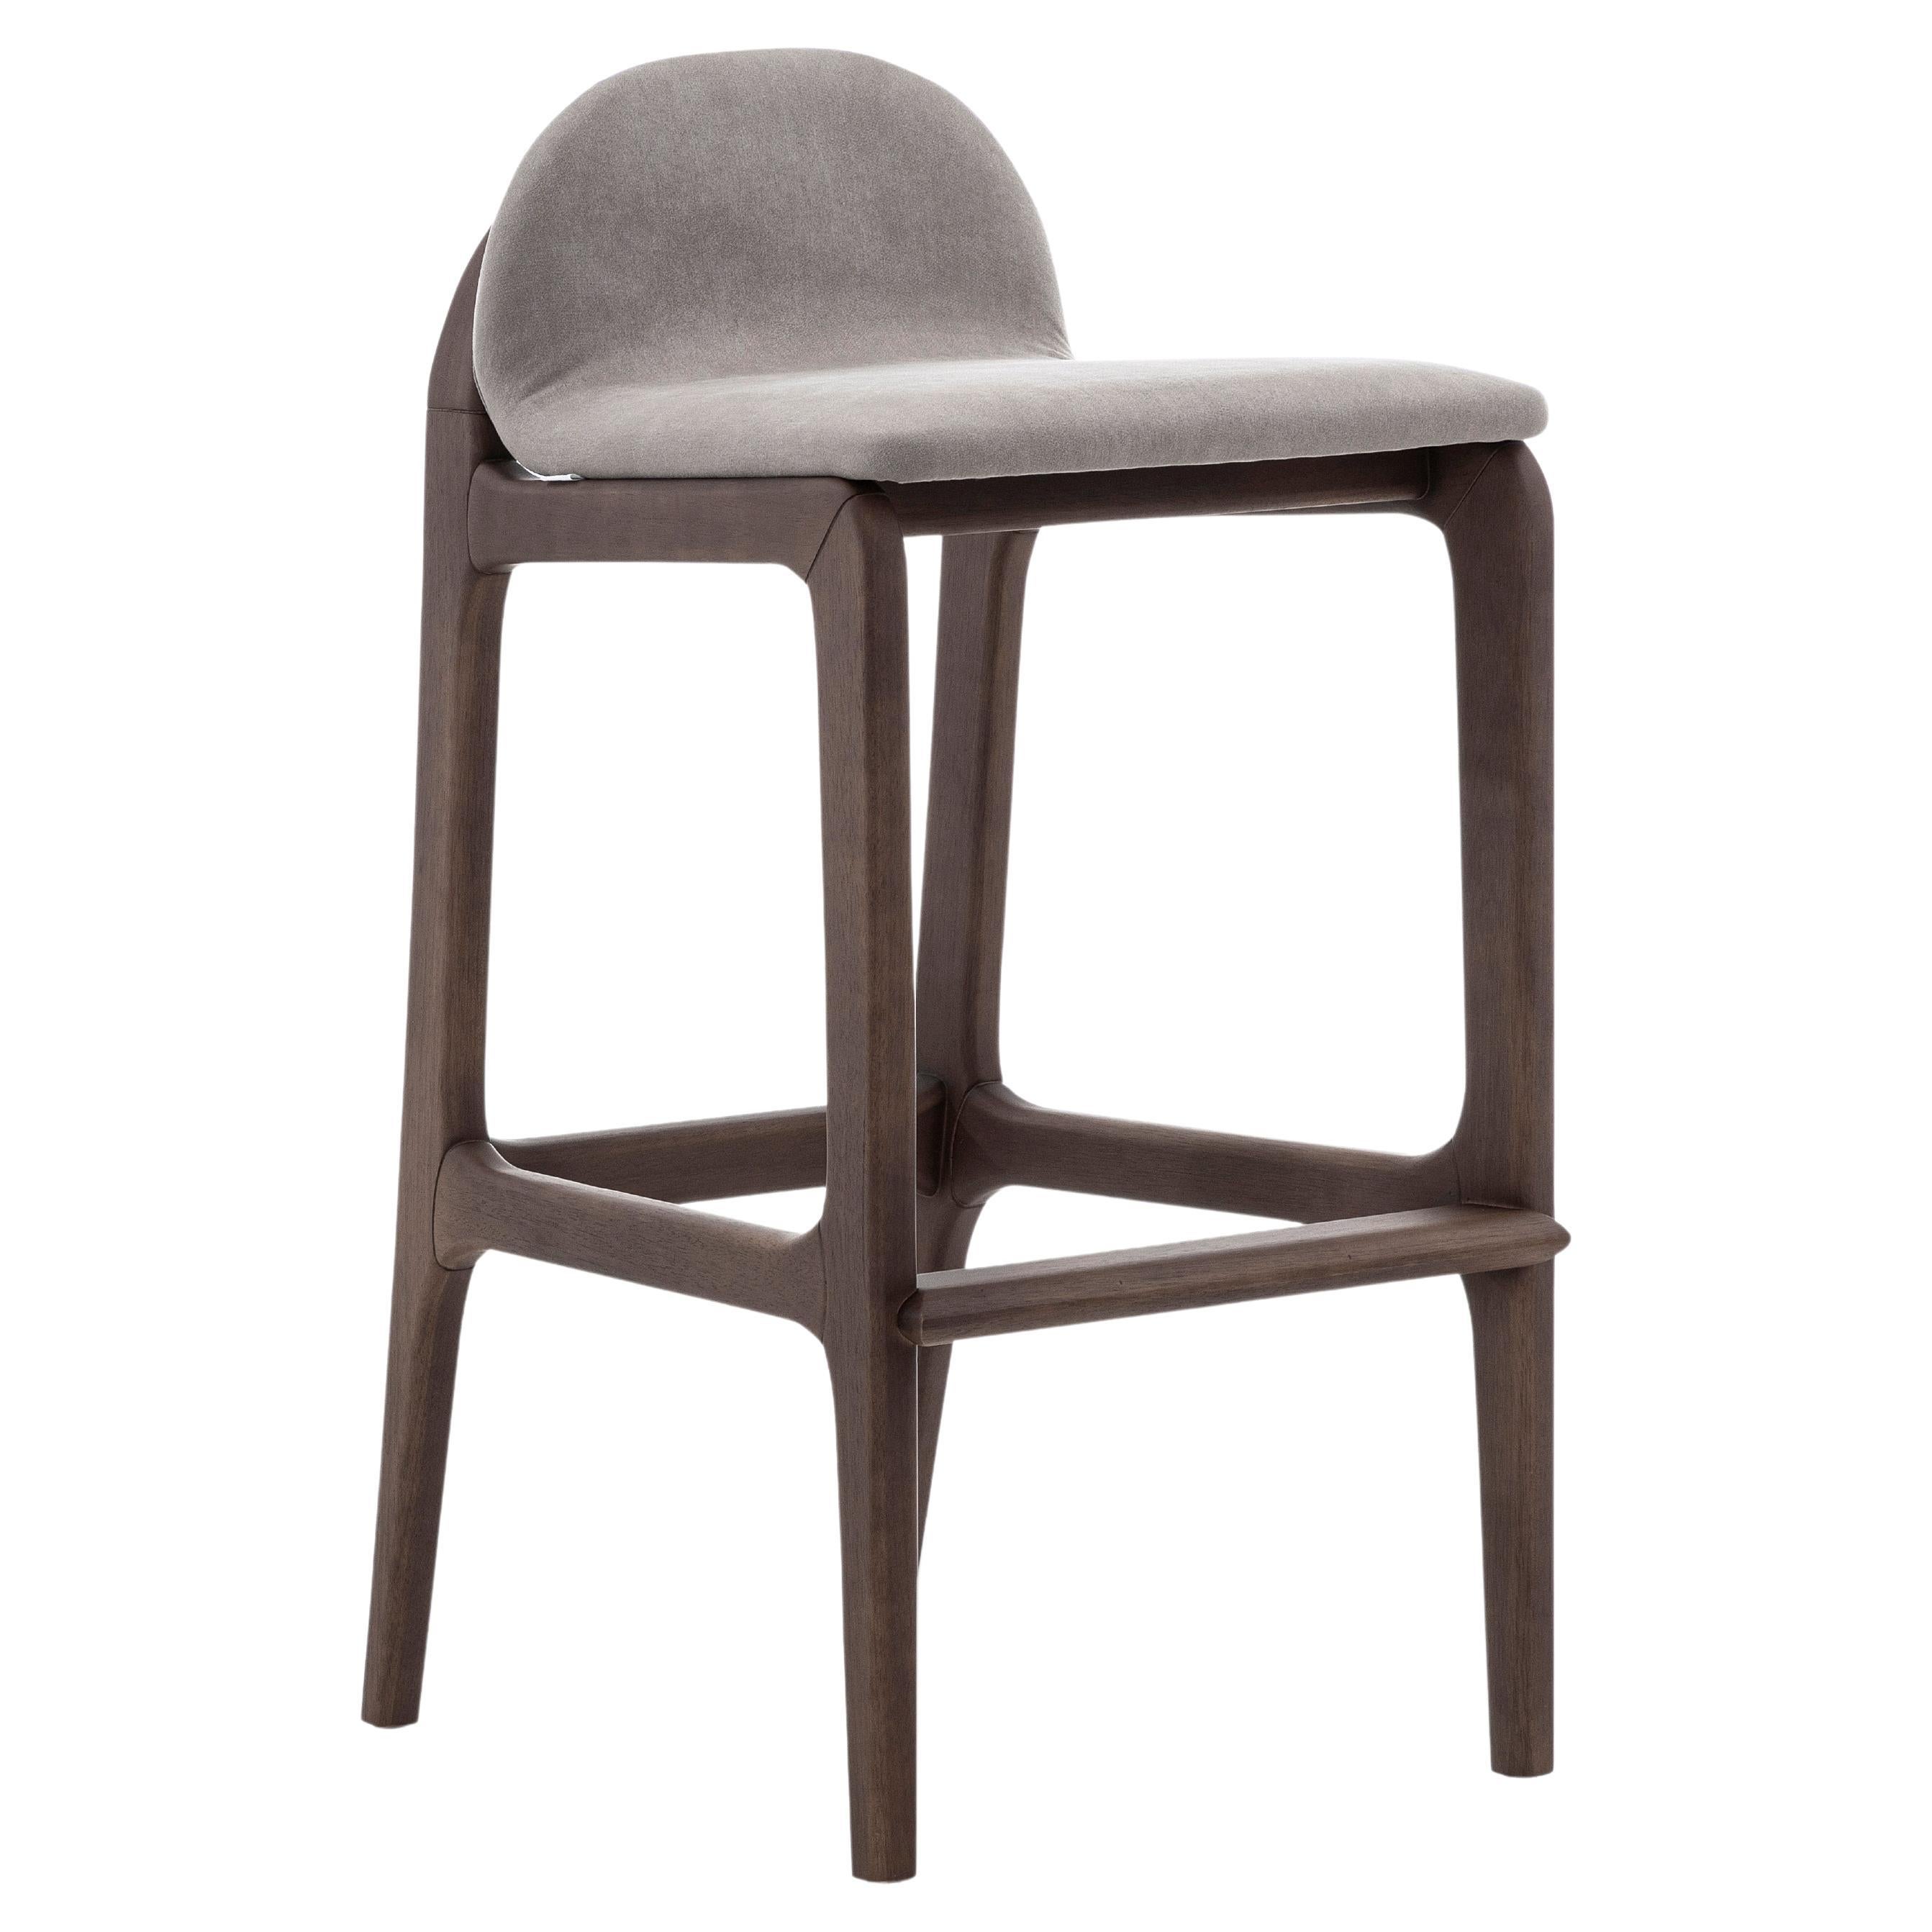 Ura Bar Stool in Walnut Wood Finish Base and Upholstered Light Brown Seat For Sale